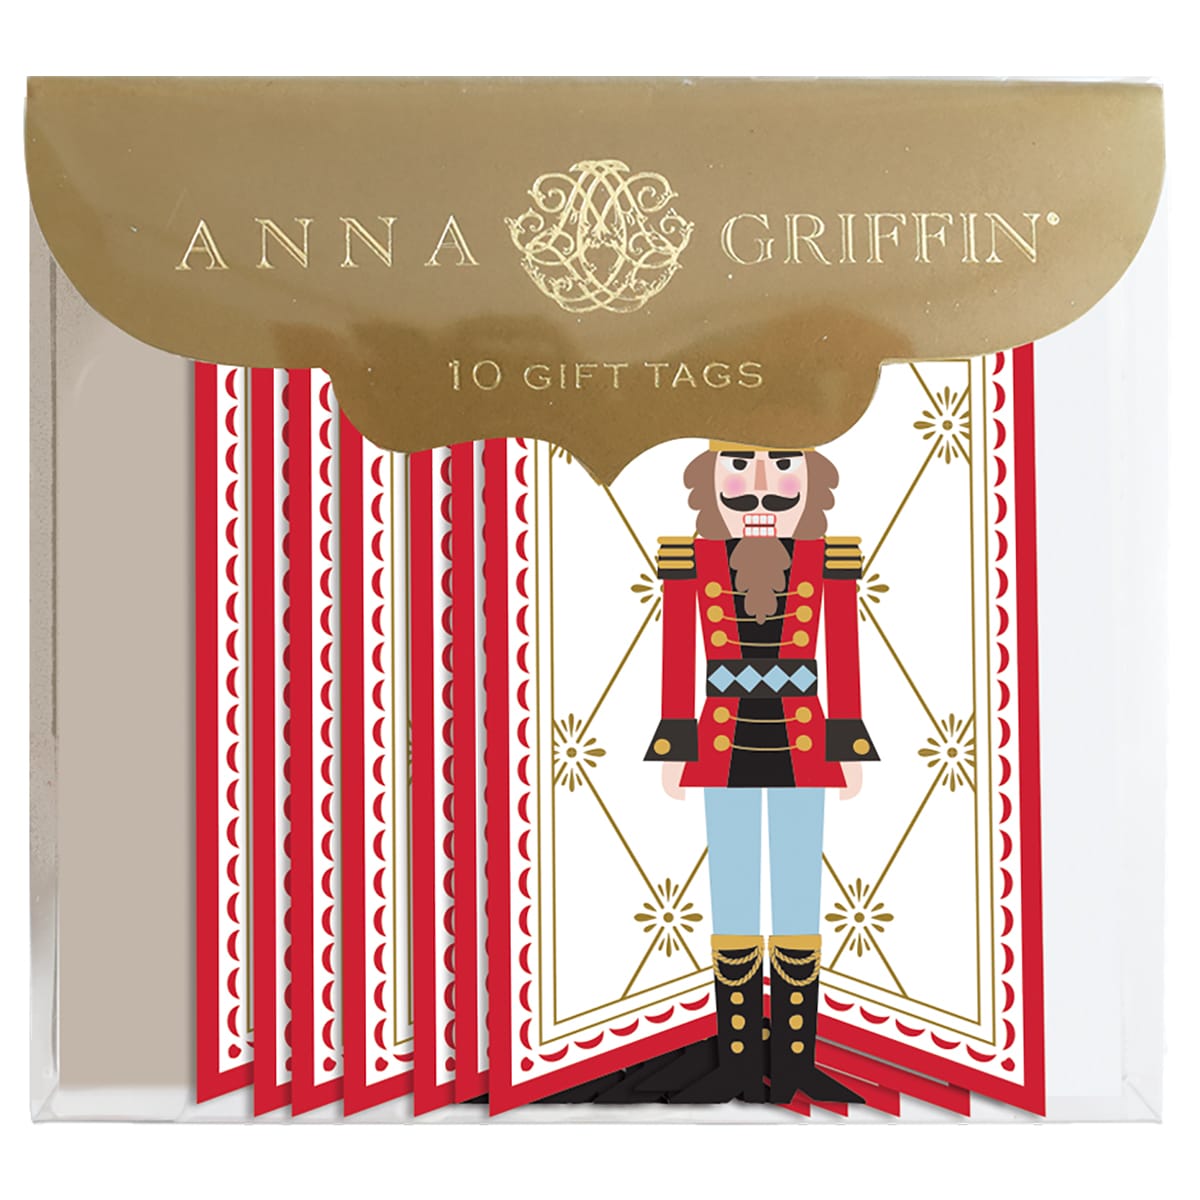 A Red Nutcracker Large Gift Tag 10 Count with a picture of a nutcracker.